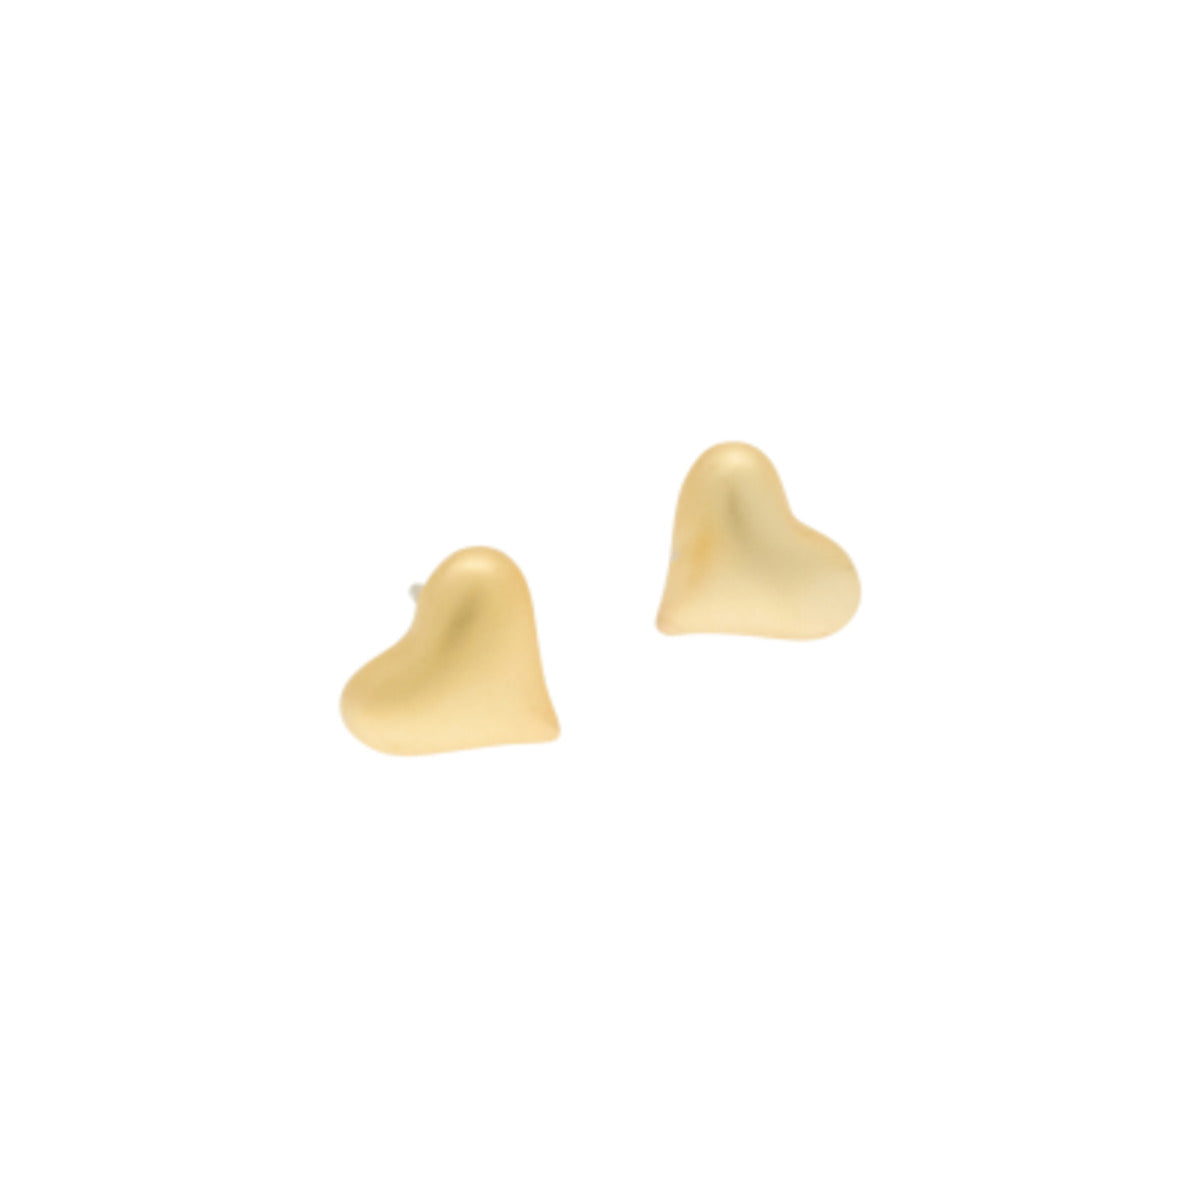 Simple yet eye-catching, these matt gold heart studs are a beautiful addition to your collection. Perfectly understated and versatile, they'll bring a hint of sparkling glamour to any look. Add instant sophistication and class with these timelessly elegant earrings!    Approx 7mm across at the widest point.